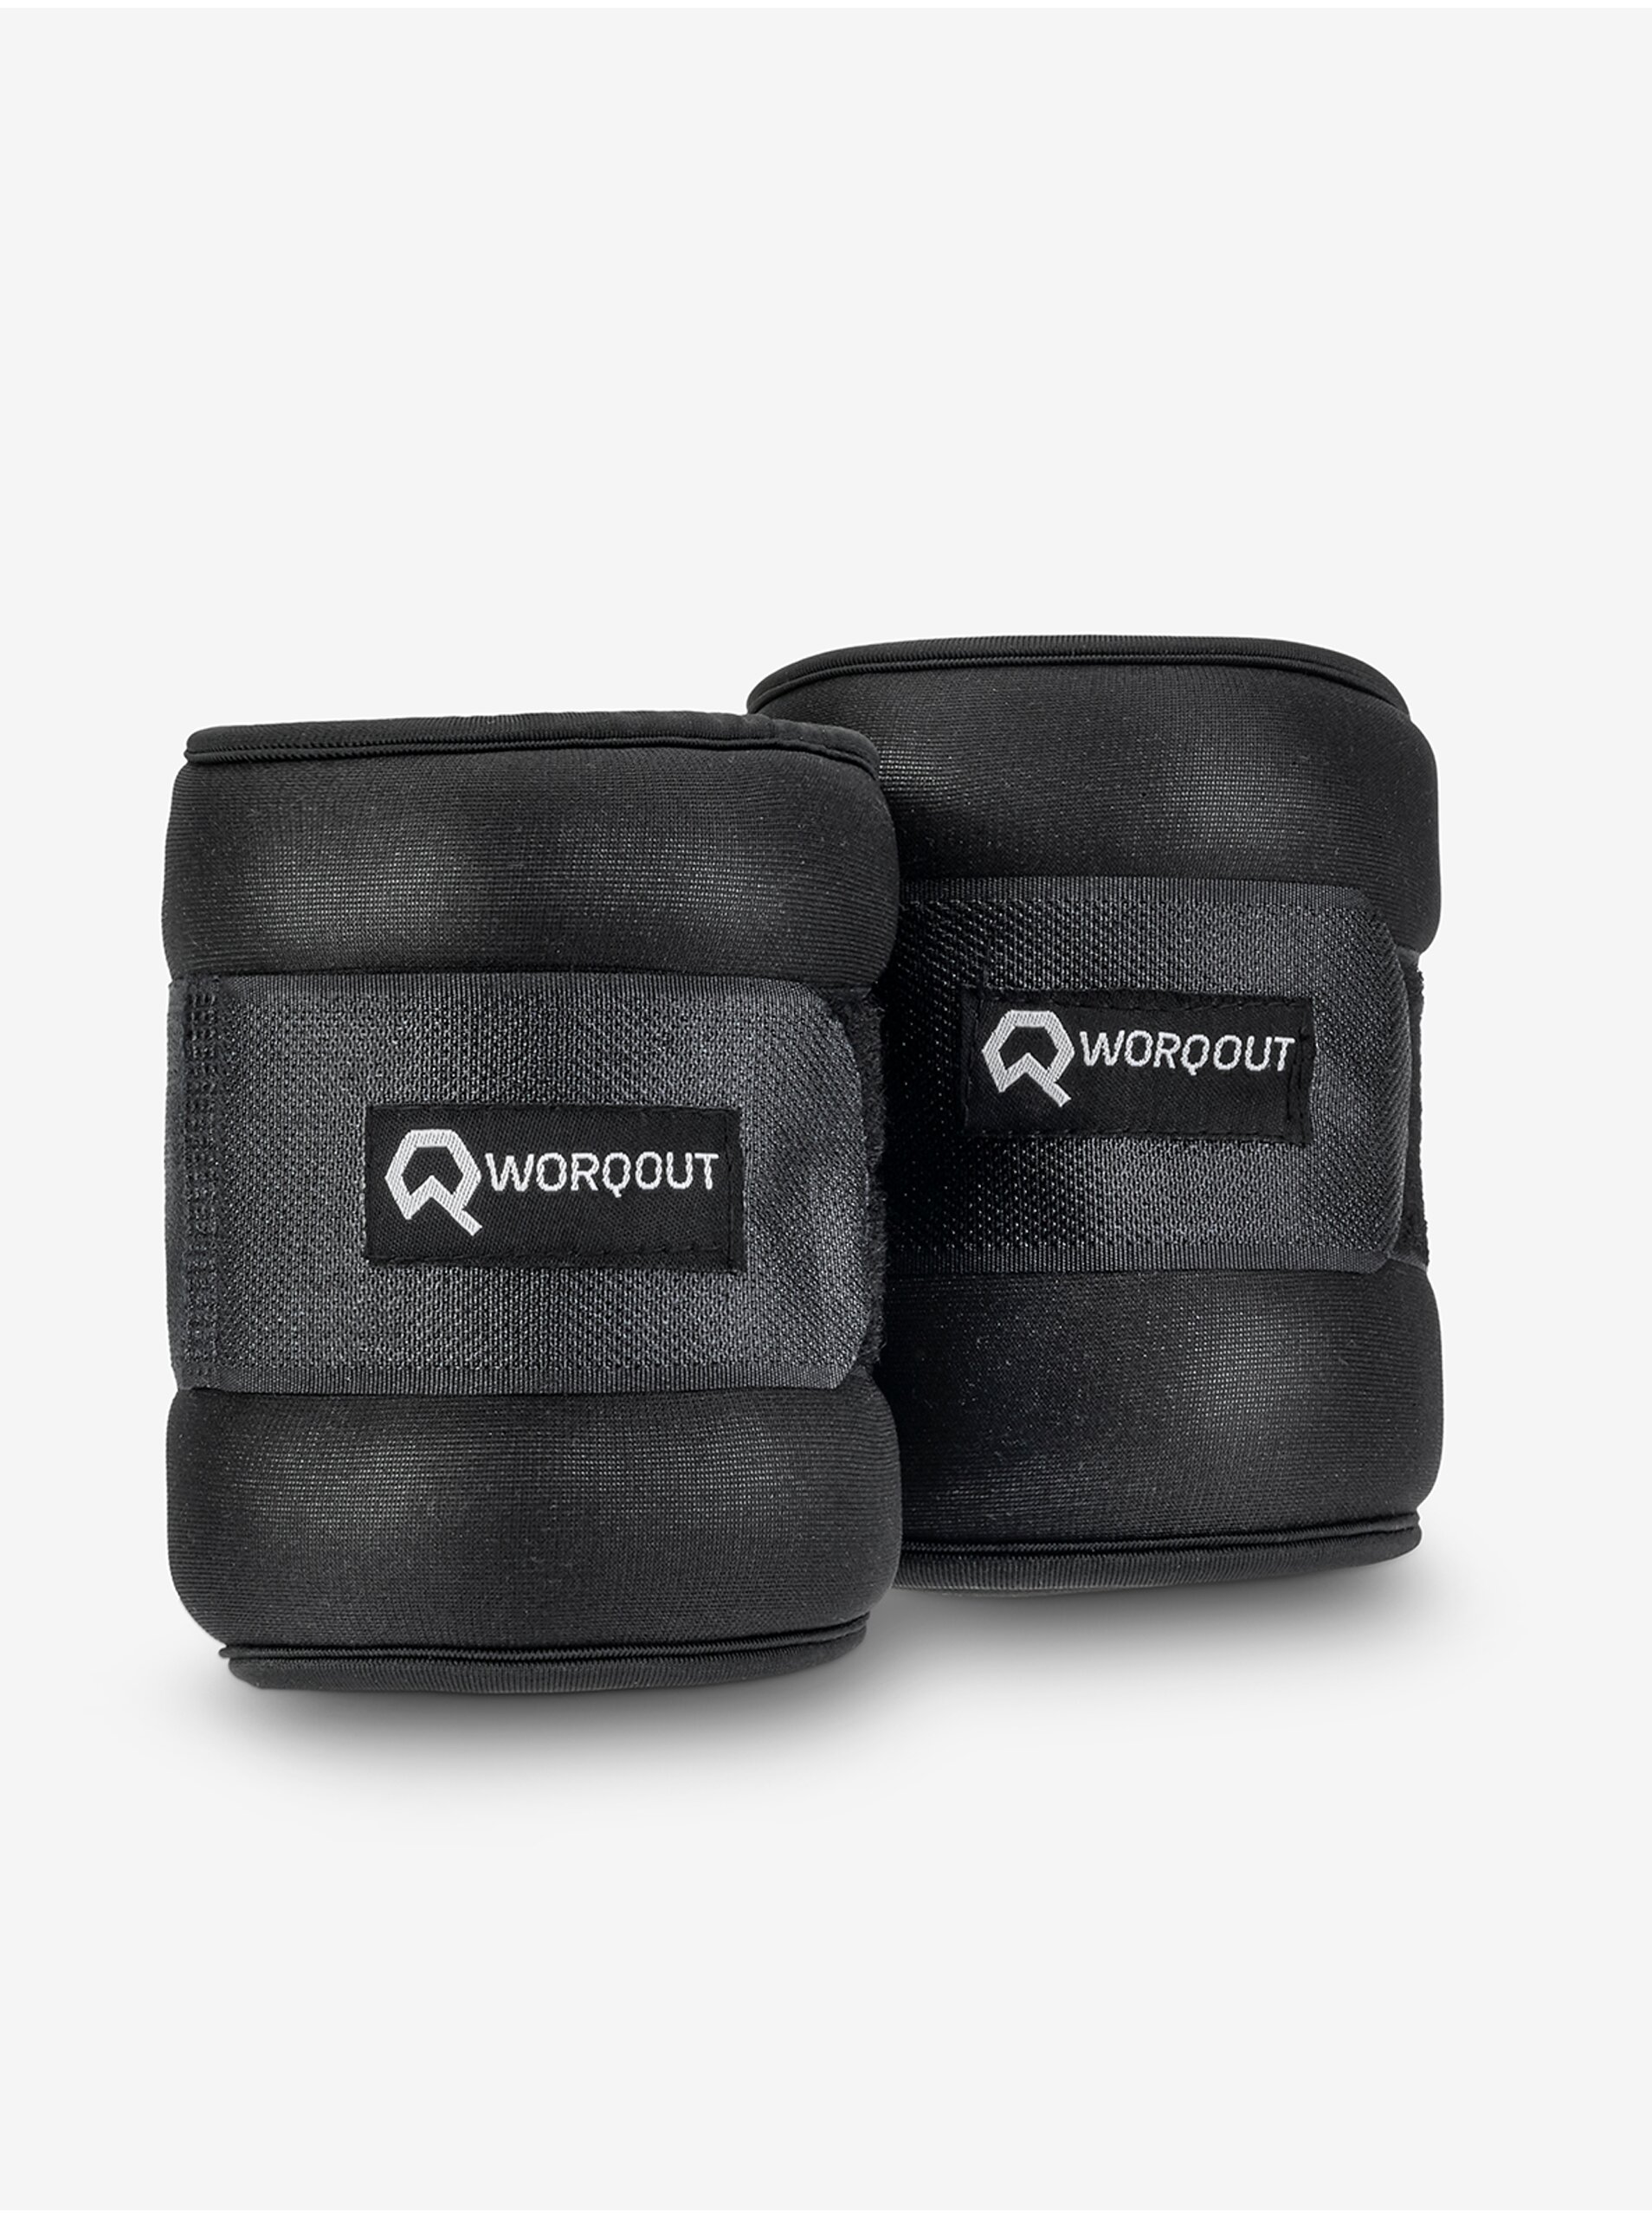 Black Wrist And Ankle Weights Worqout Wrist And Ankle Weight 0 - Unisex